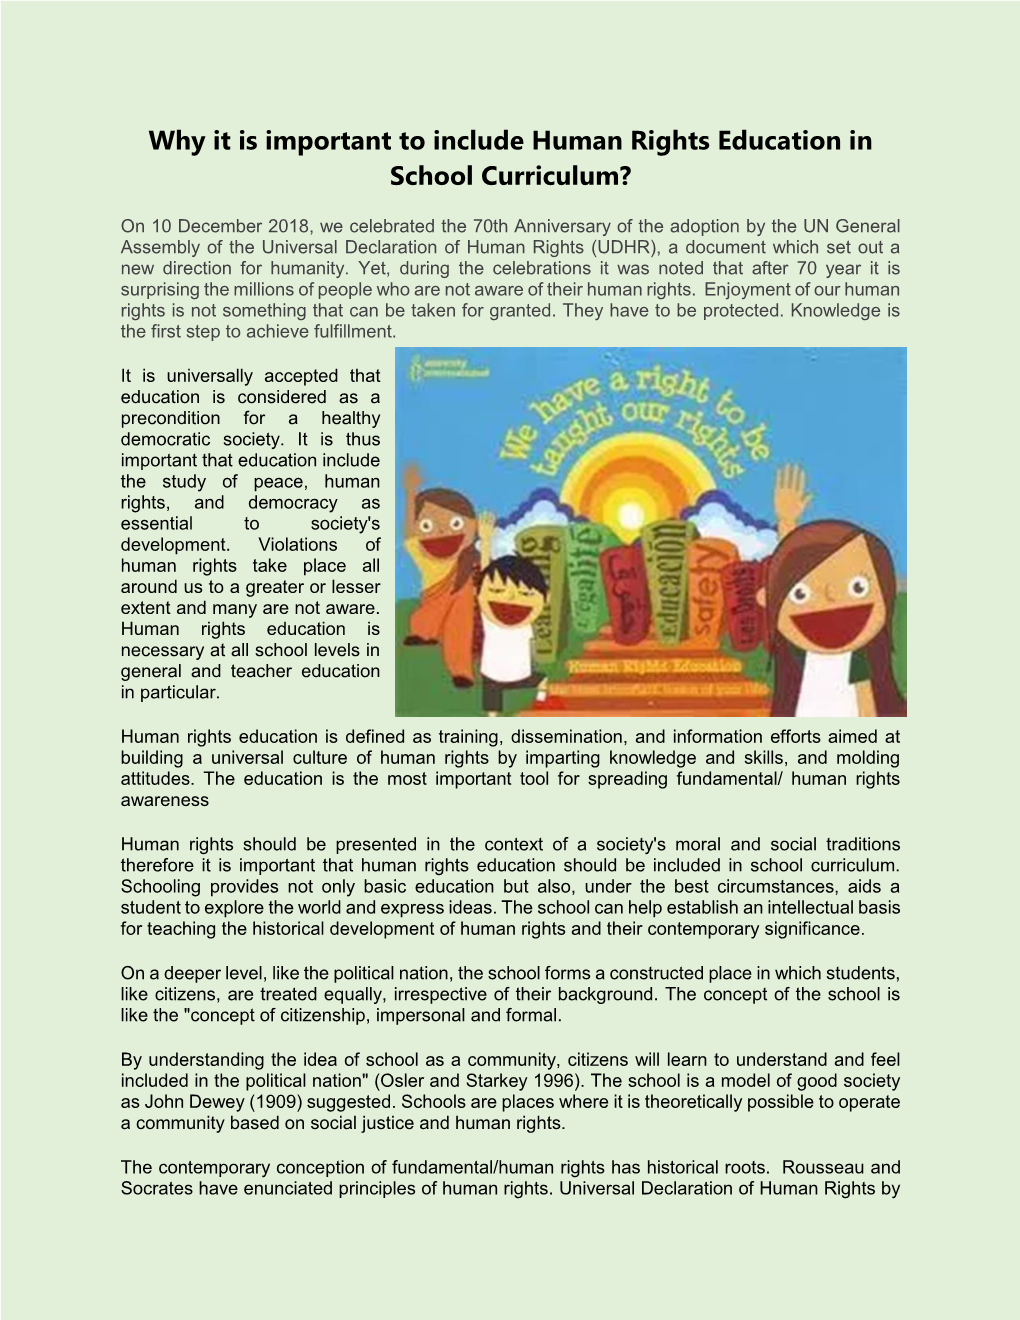 Why It Is Important to Include Human Rights Education in School Curriculum?